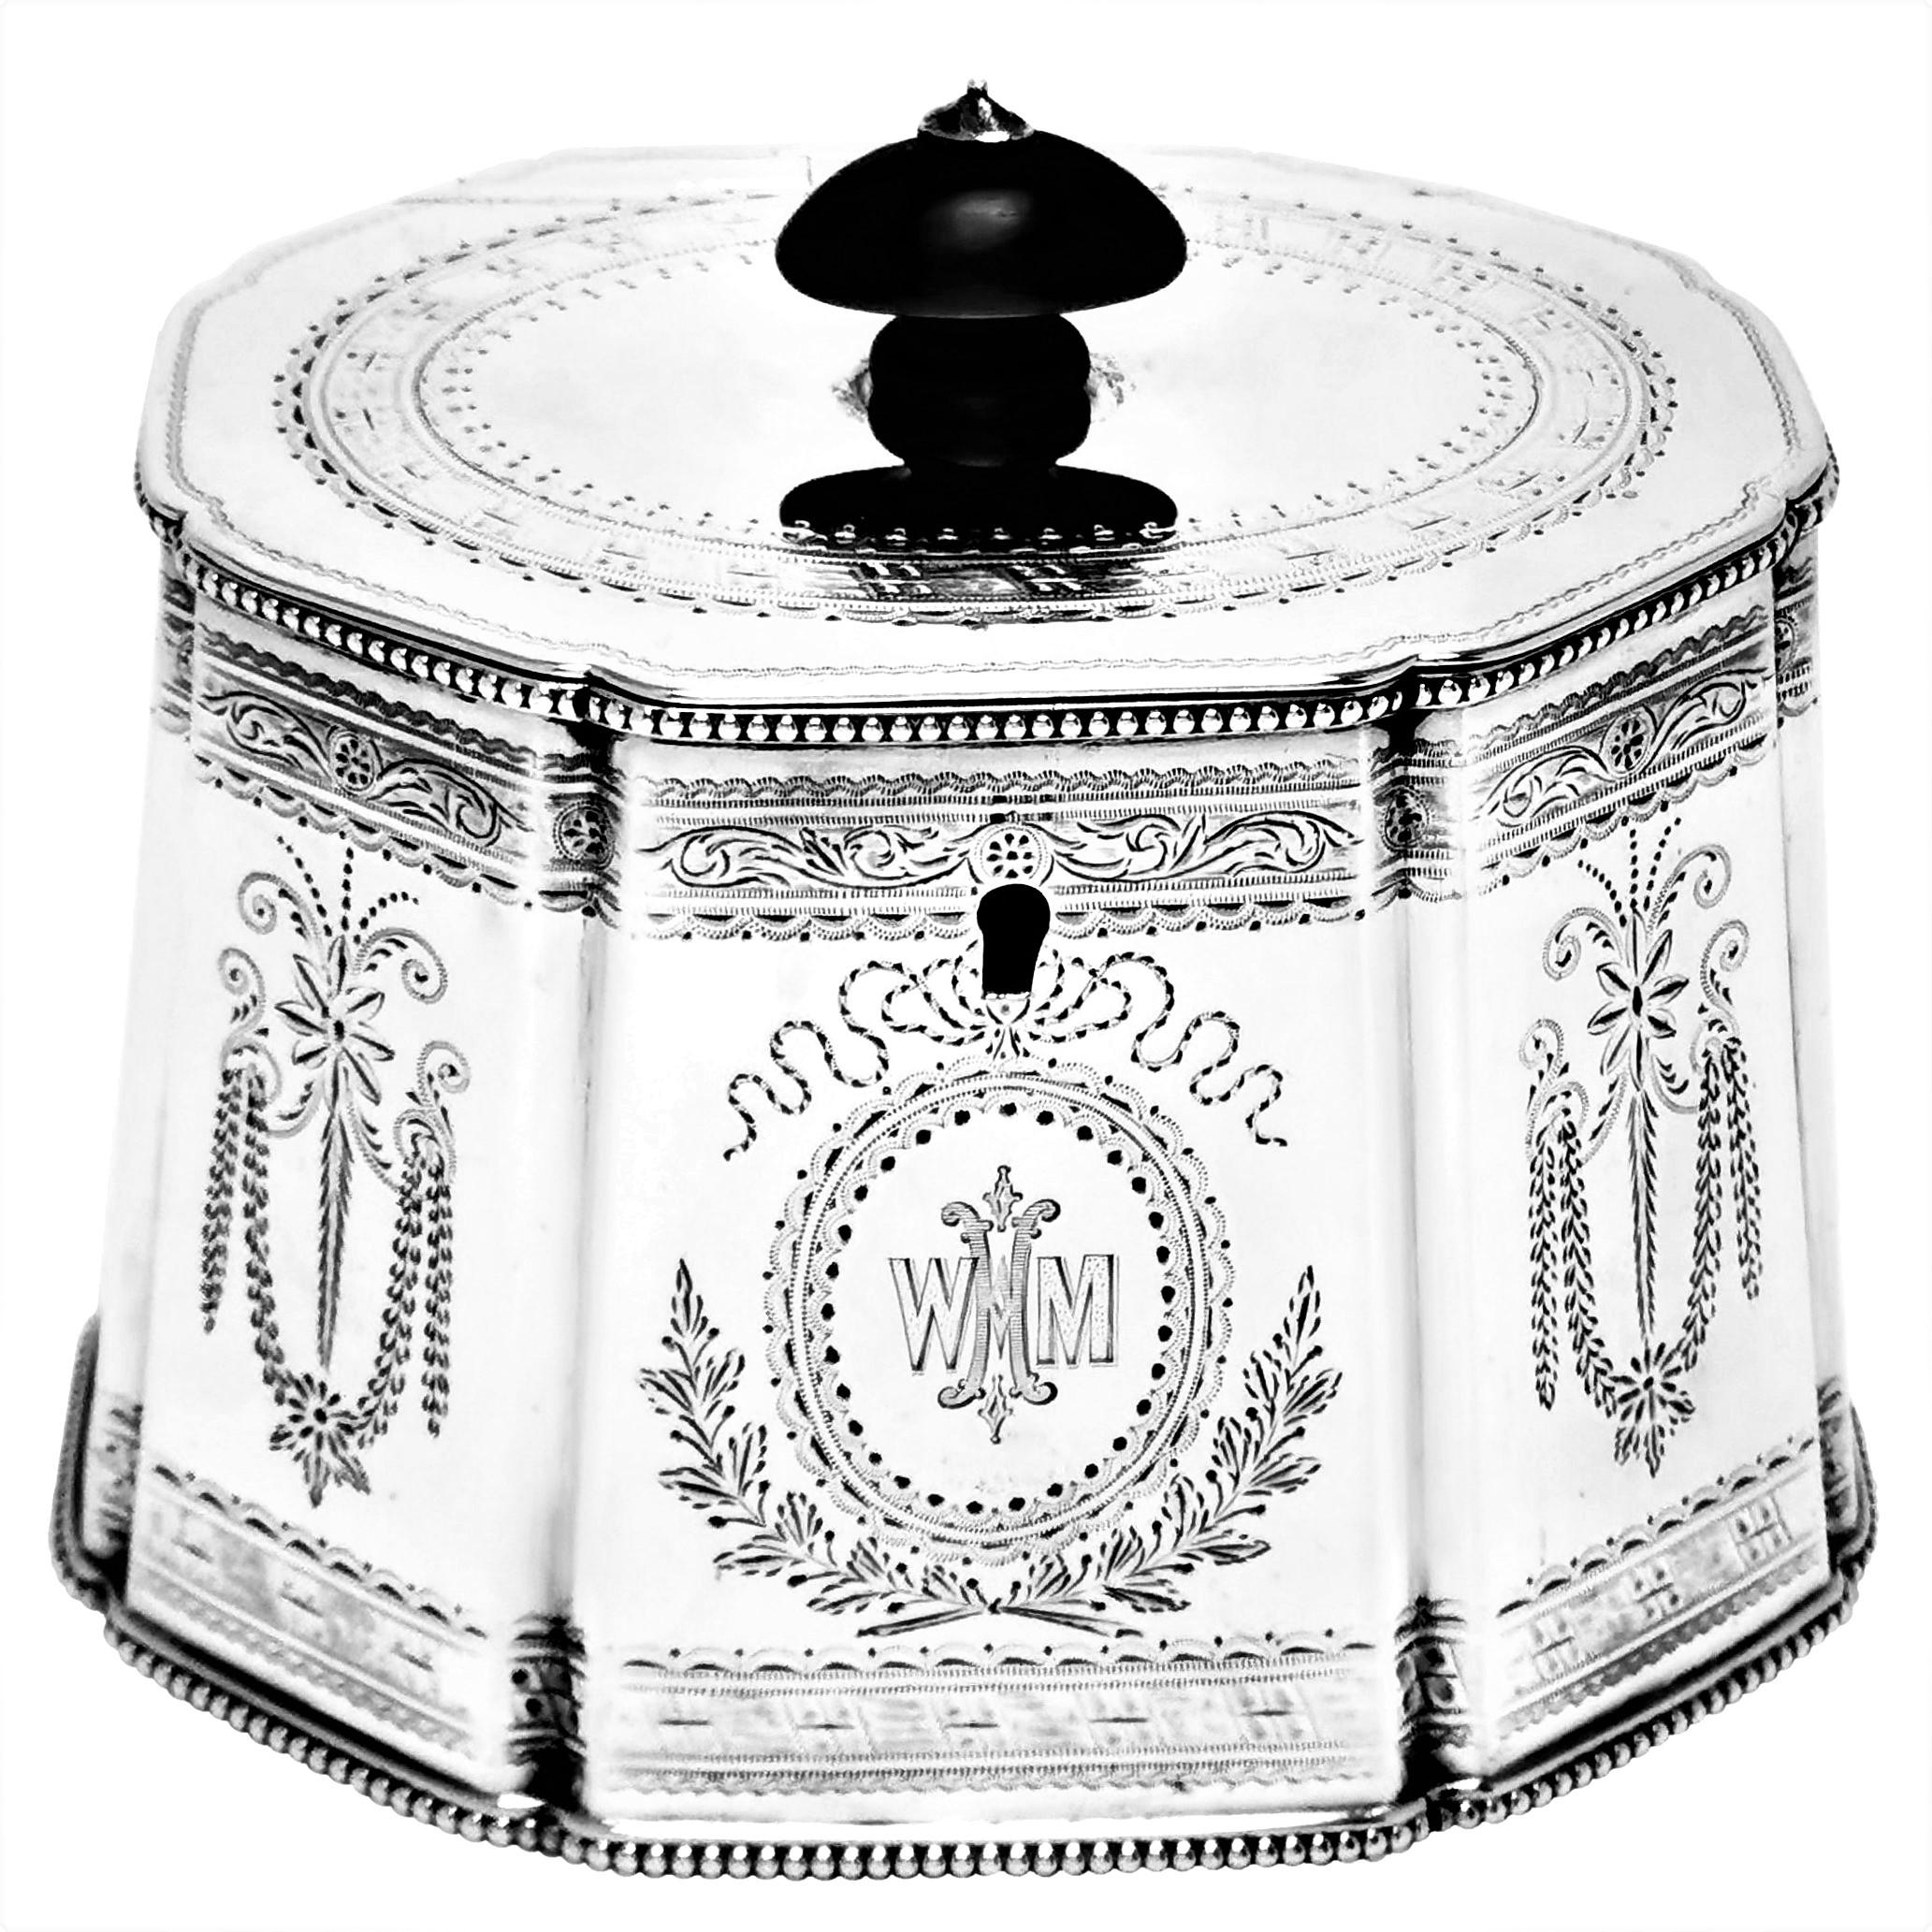 A lovely Antique Victorian Sterling Silver Tea Caddy in an elegant tapered octagonal shape. The panels of the body and the hinged lid are embellished with beautiful bright cut engraved patterns and an engraved monogram.

Made in London, England in